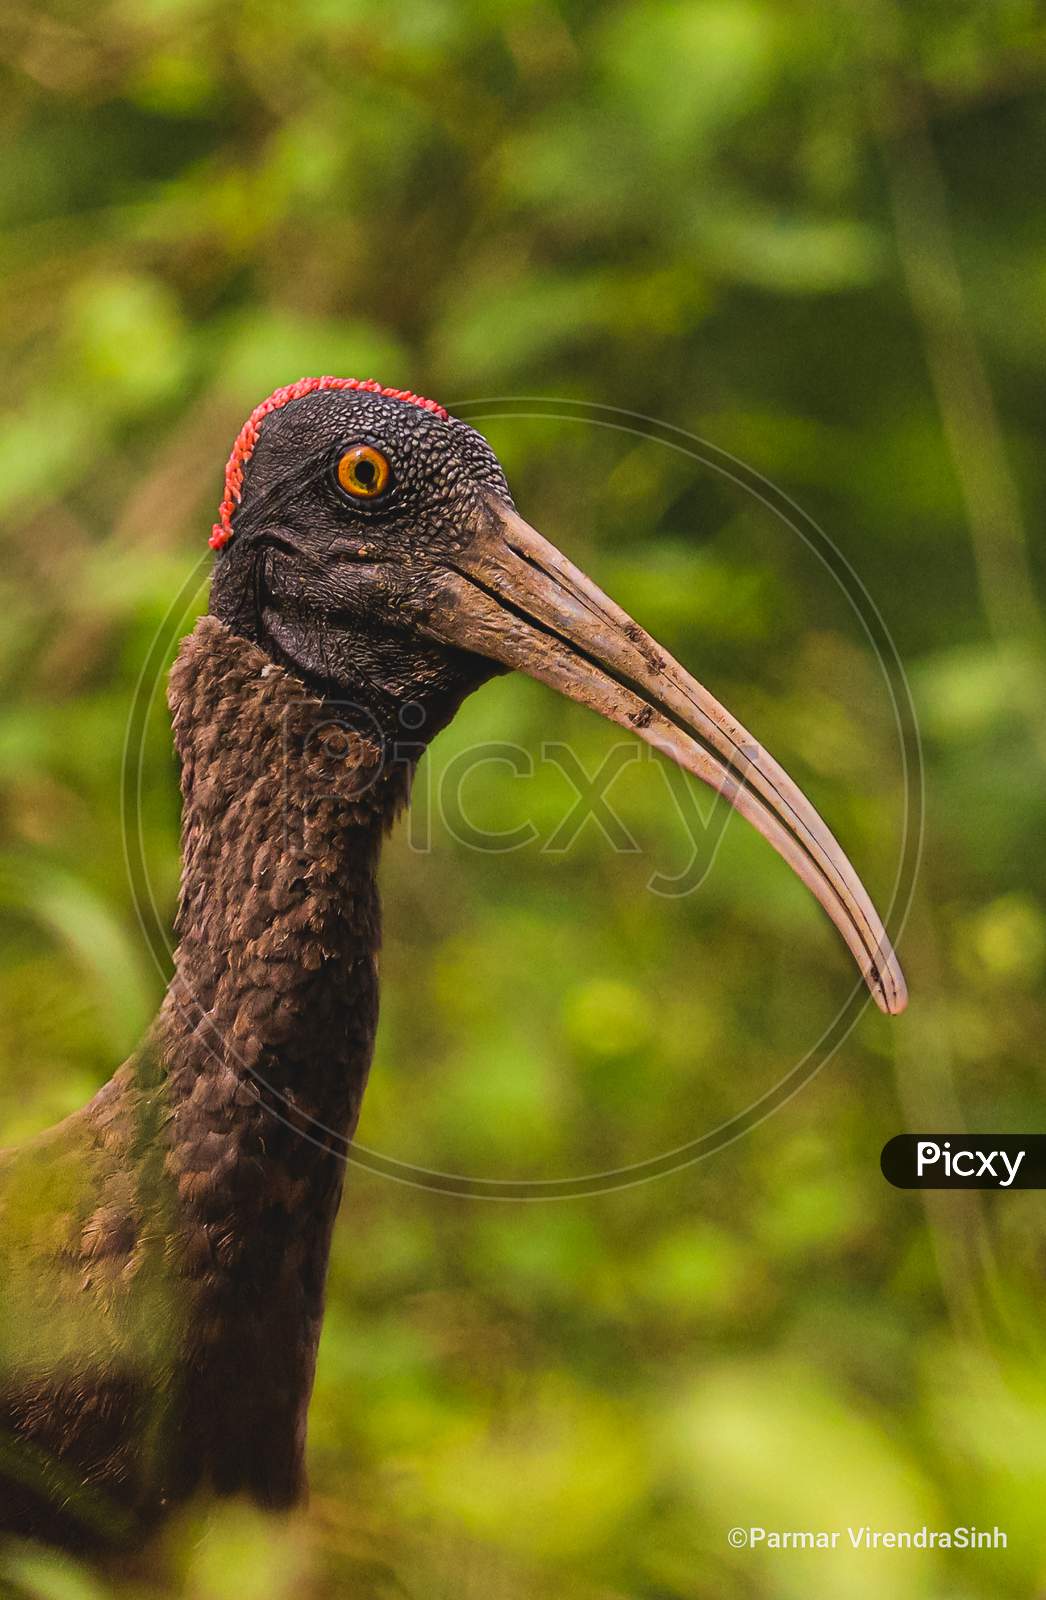 The red-naped ibis